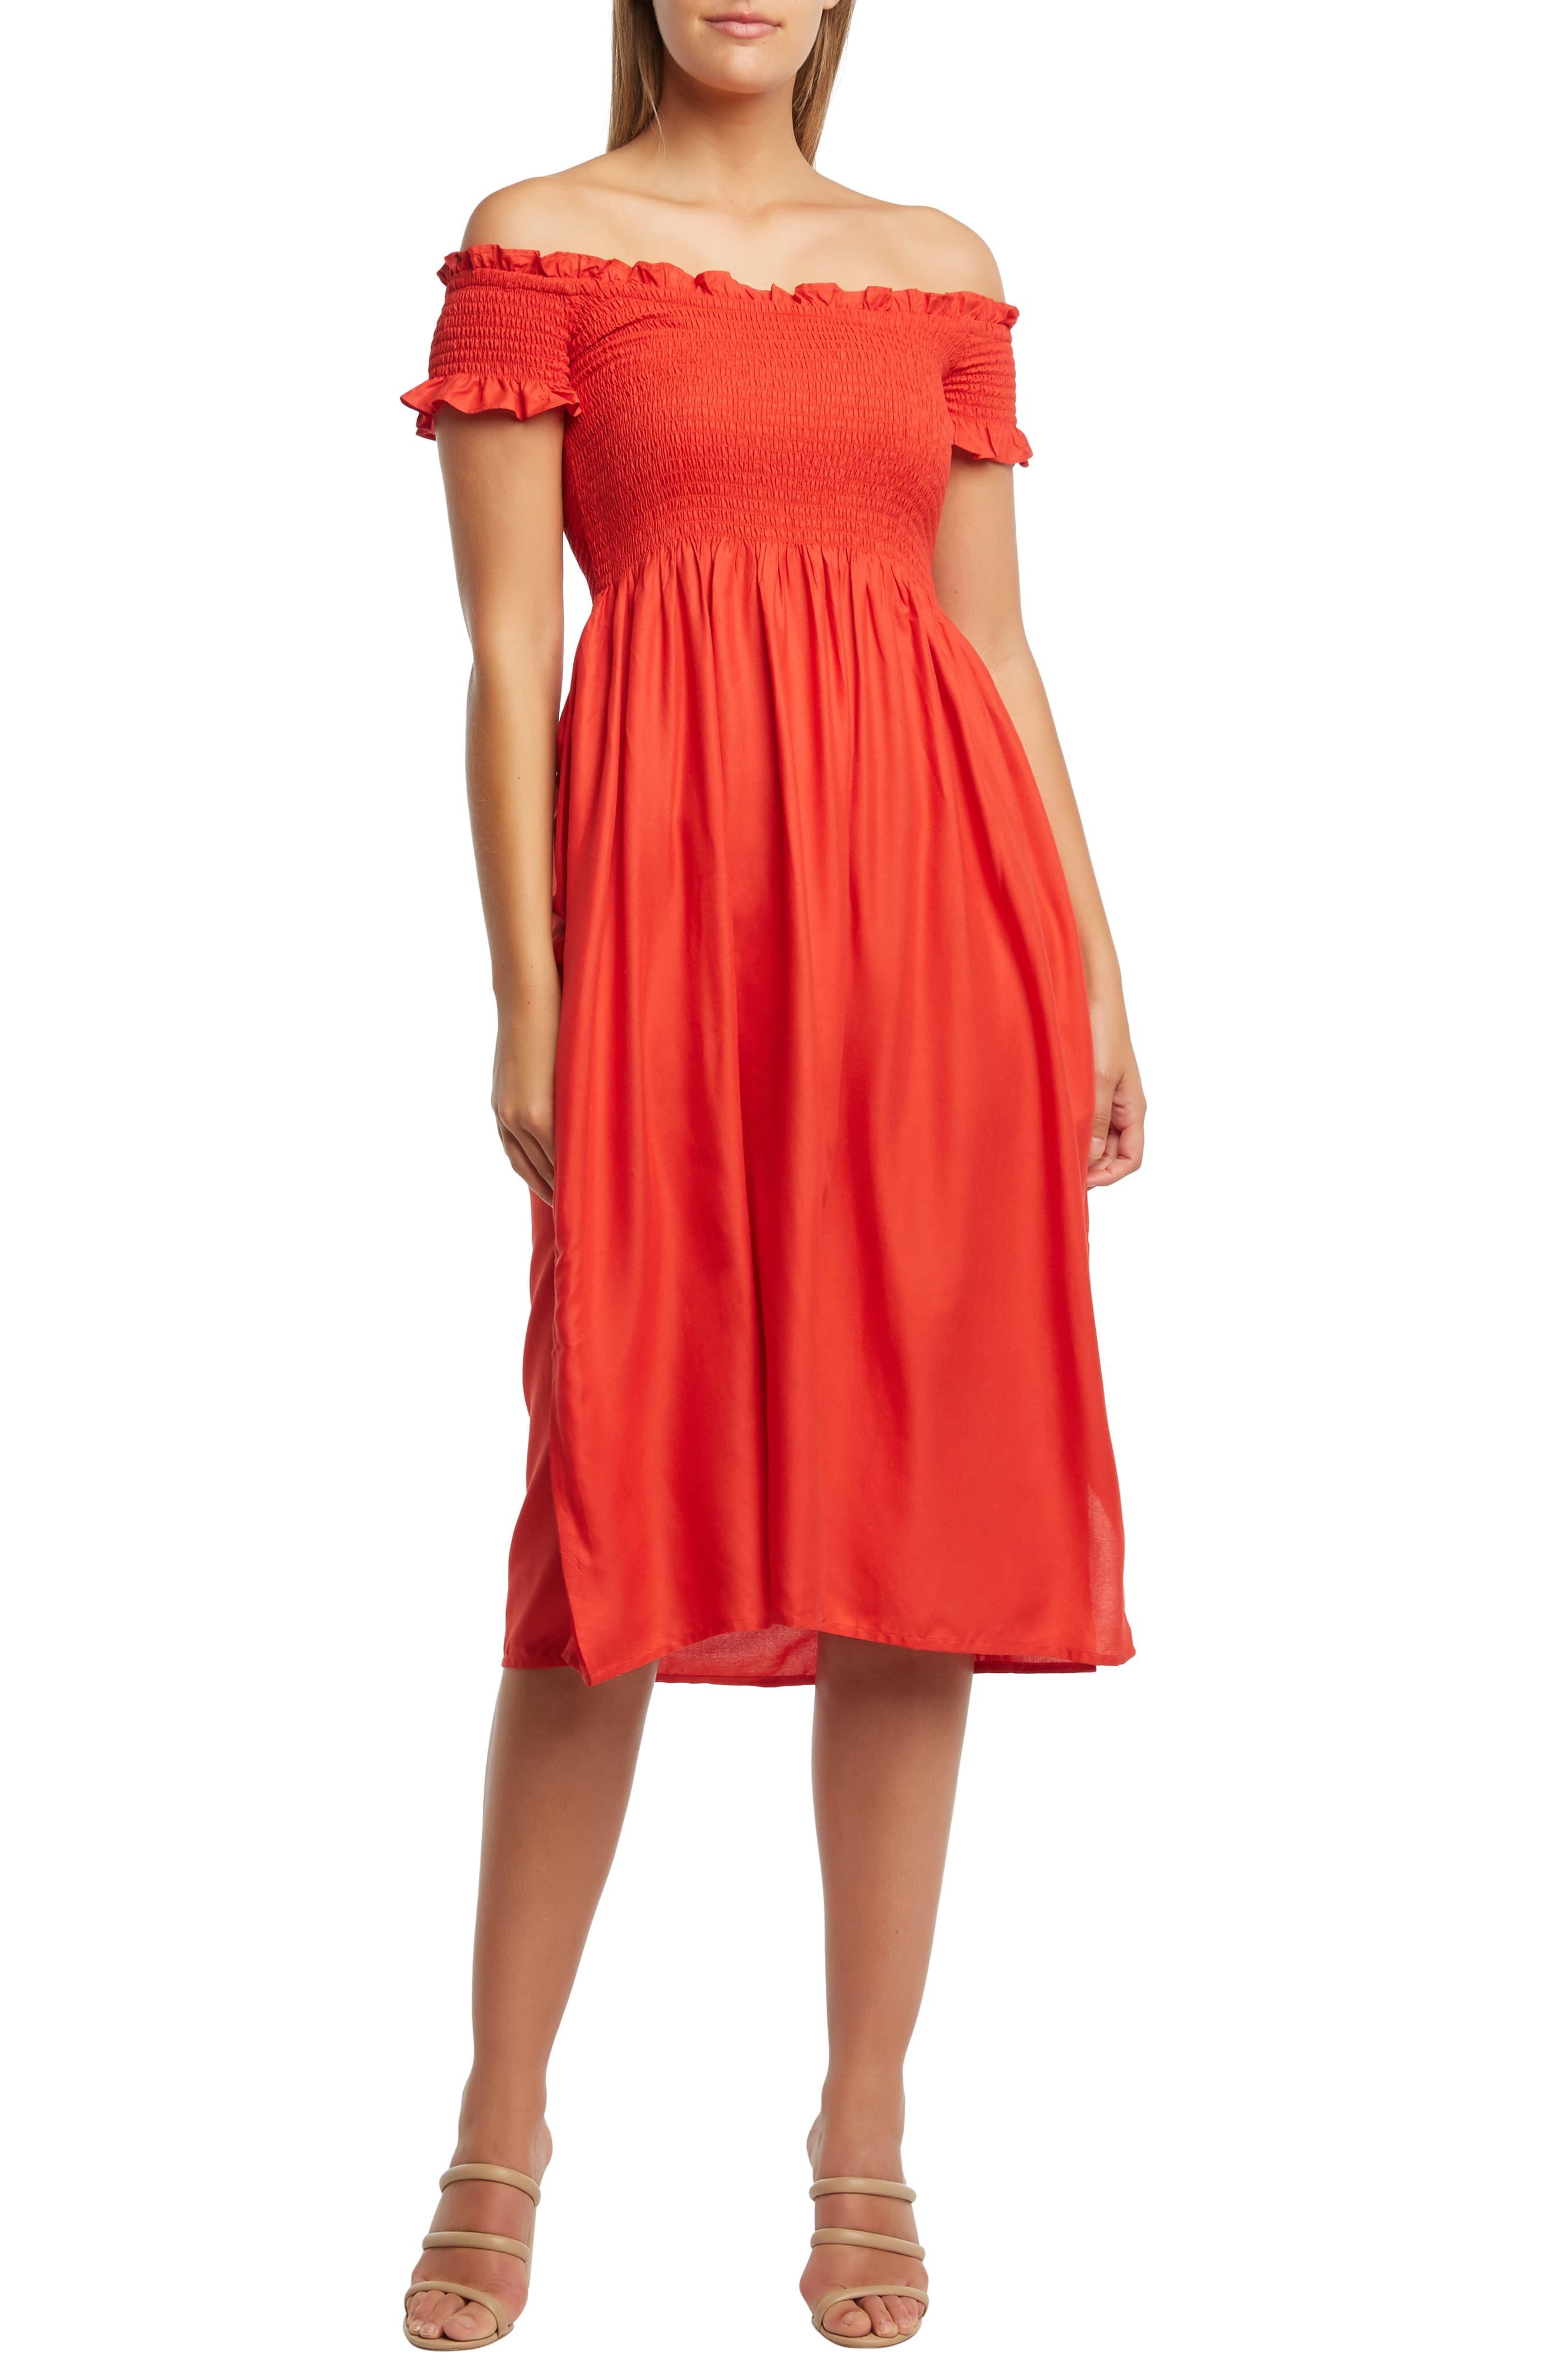 Bardot Cindy Off The Shoulder Dress in Red - Lyst